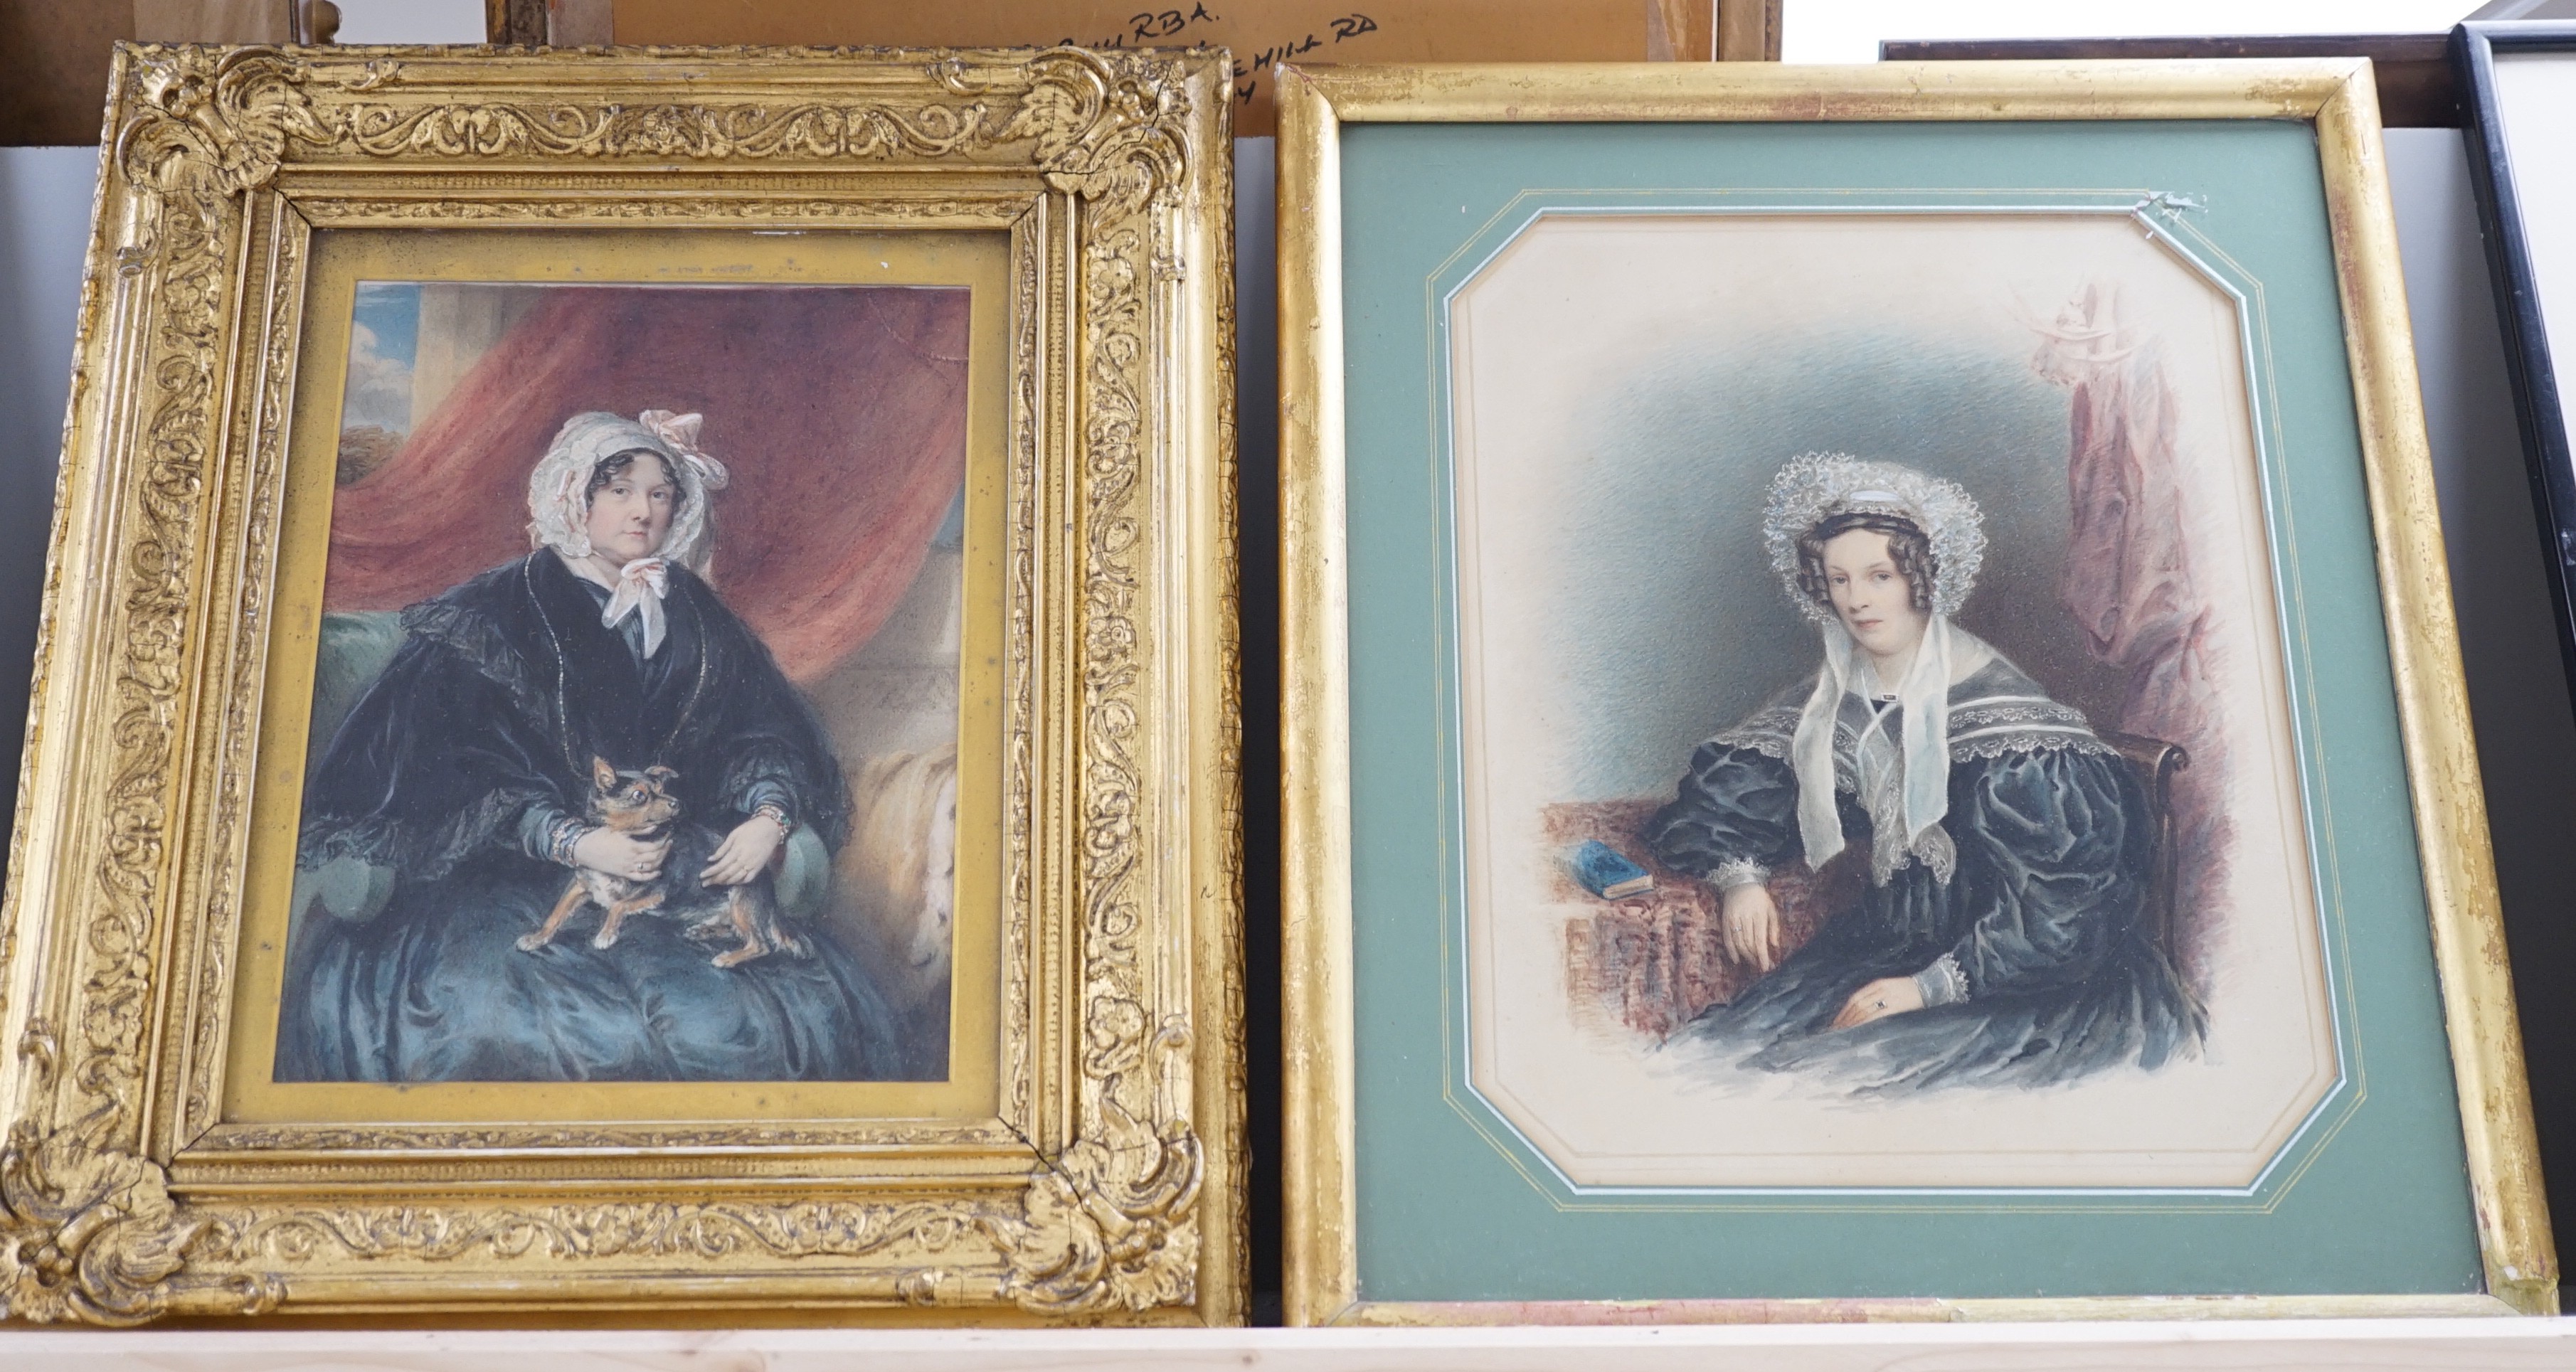 Sir William John Newton (1785-1869), watercolour, Portrait of a lady with a lap dog, 22 x 17cm, and another similar portrait of Mrs Baily, wife of Dr Bailey of Harwich, 27 x 21cm